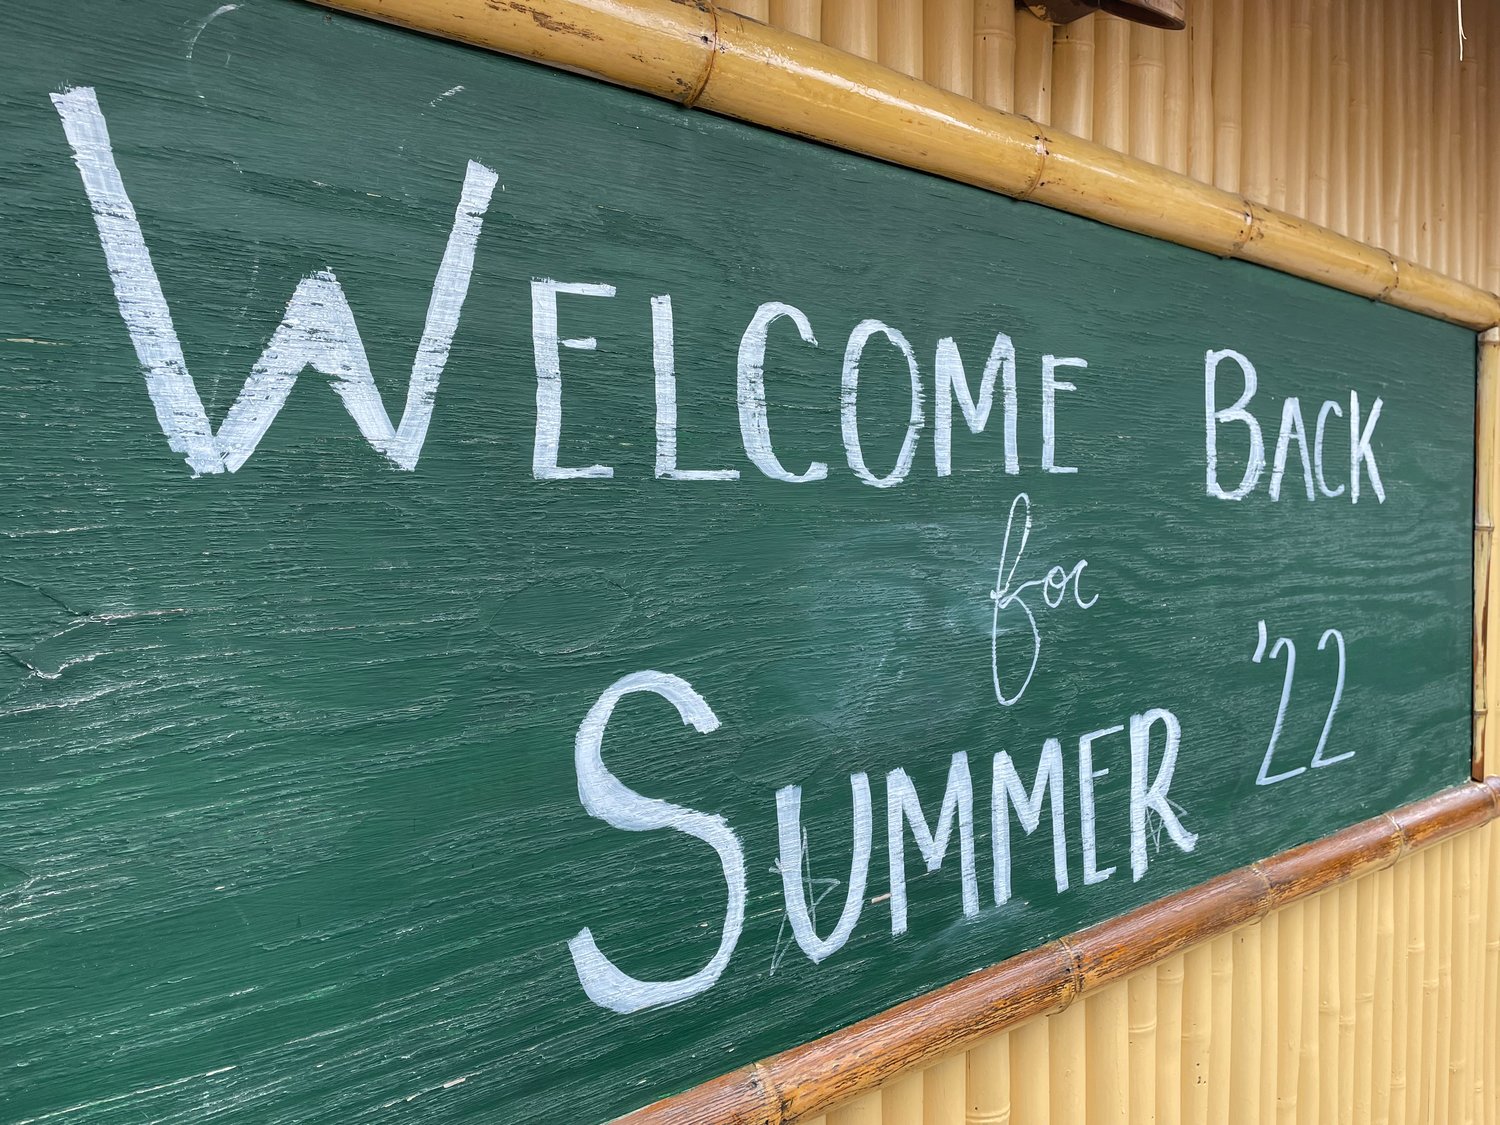 Dublin Deck welcomes back guests for the summer 2022 season.